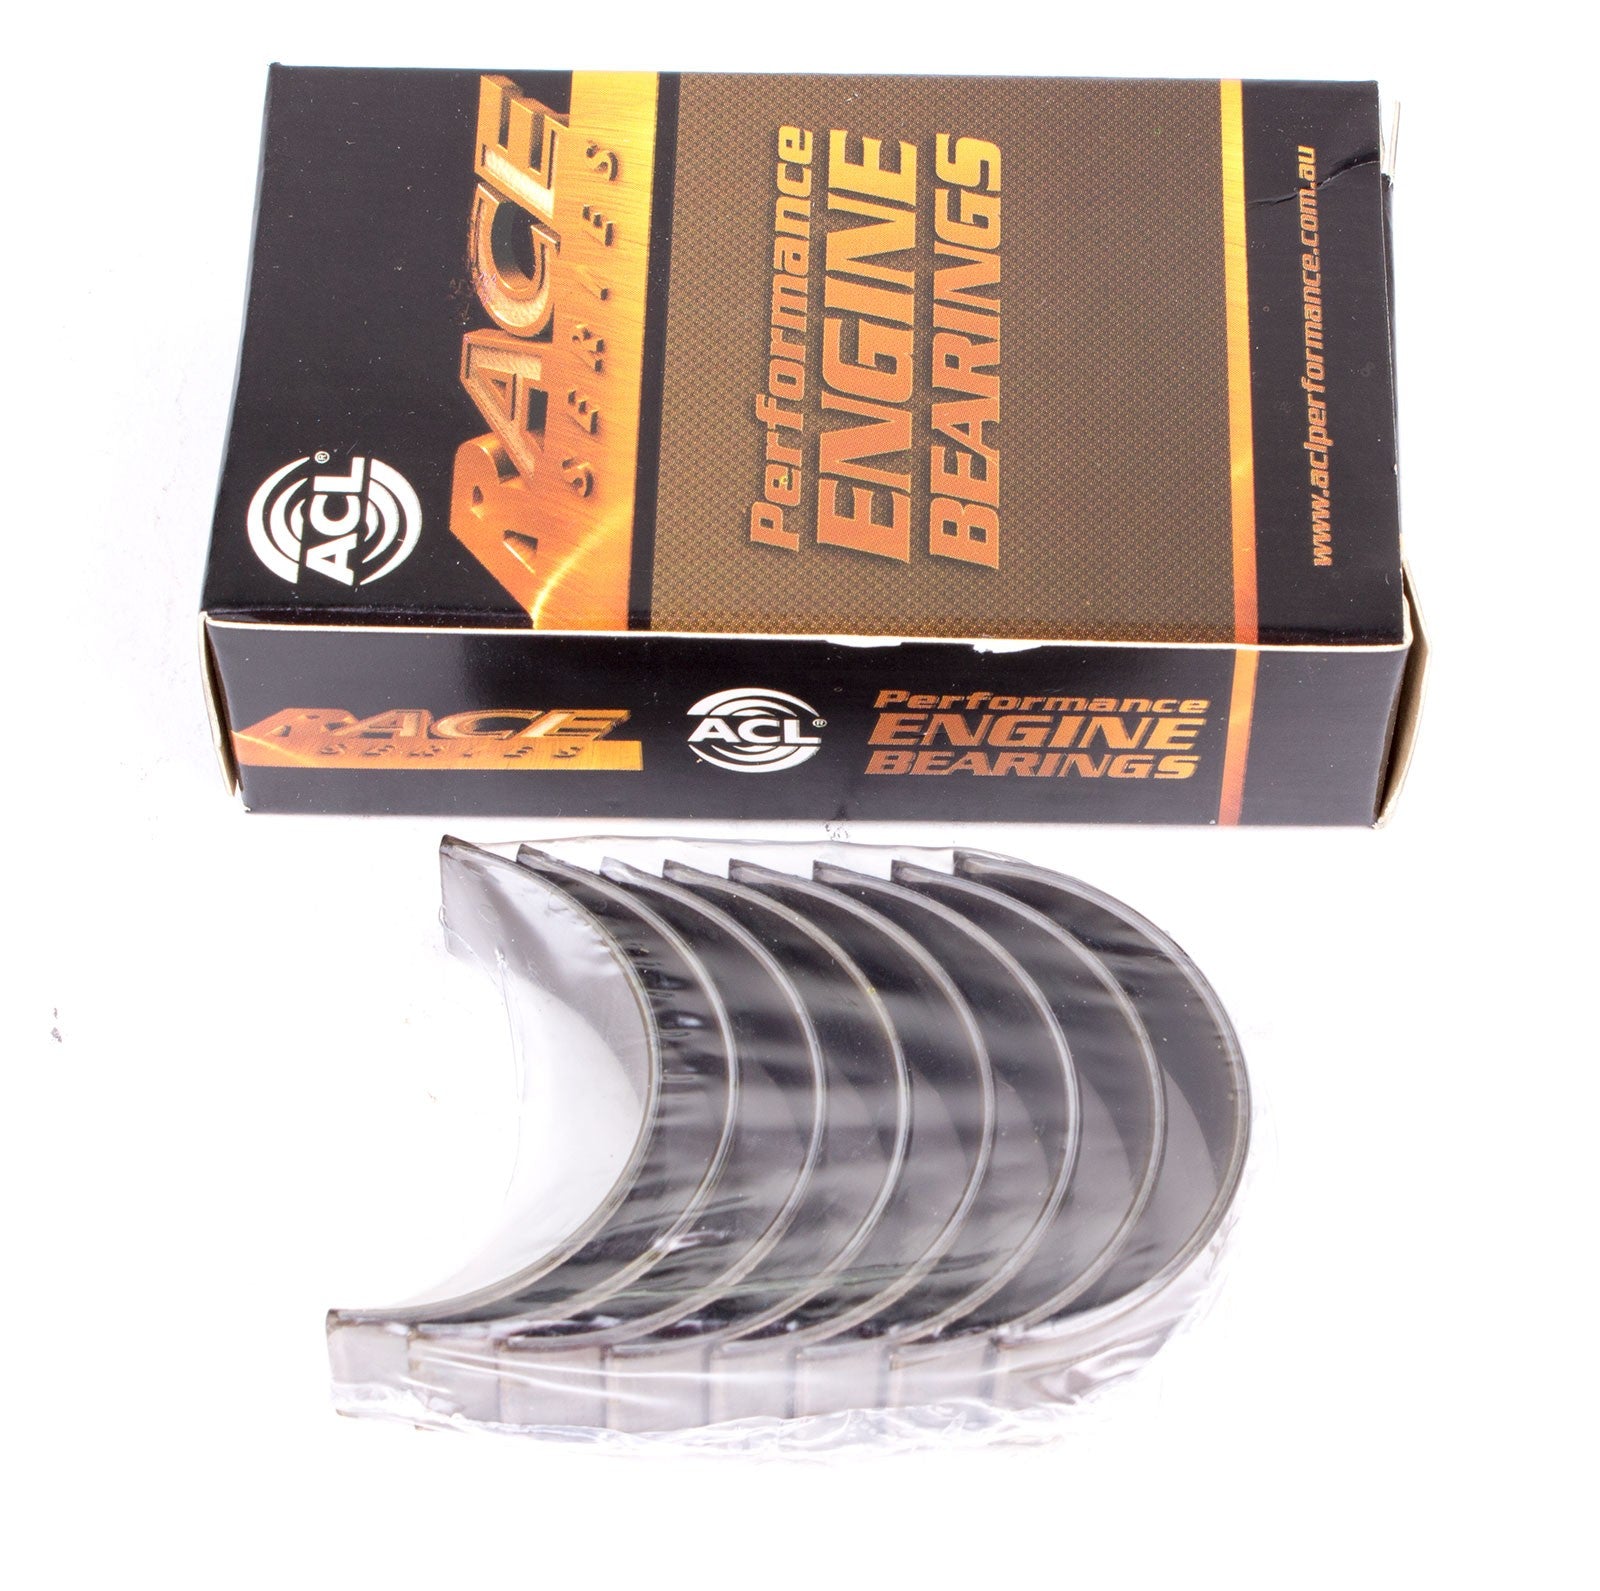 ACL 5M5647H-.25 Main bearing set (ACL Race Series) Photo-0 